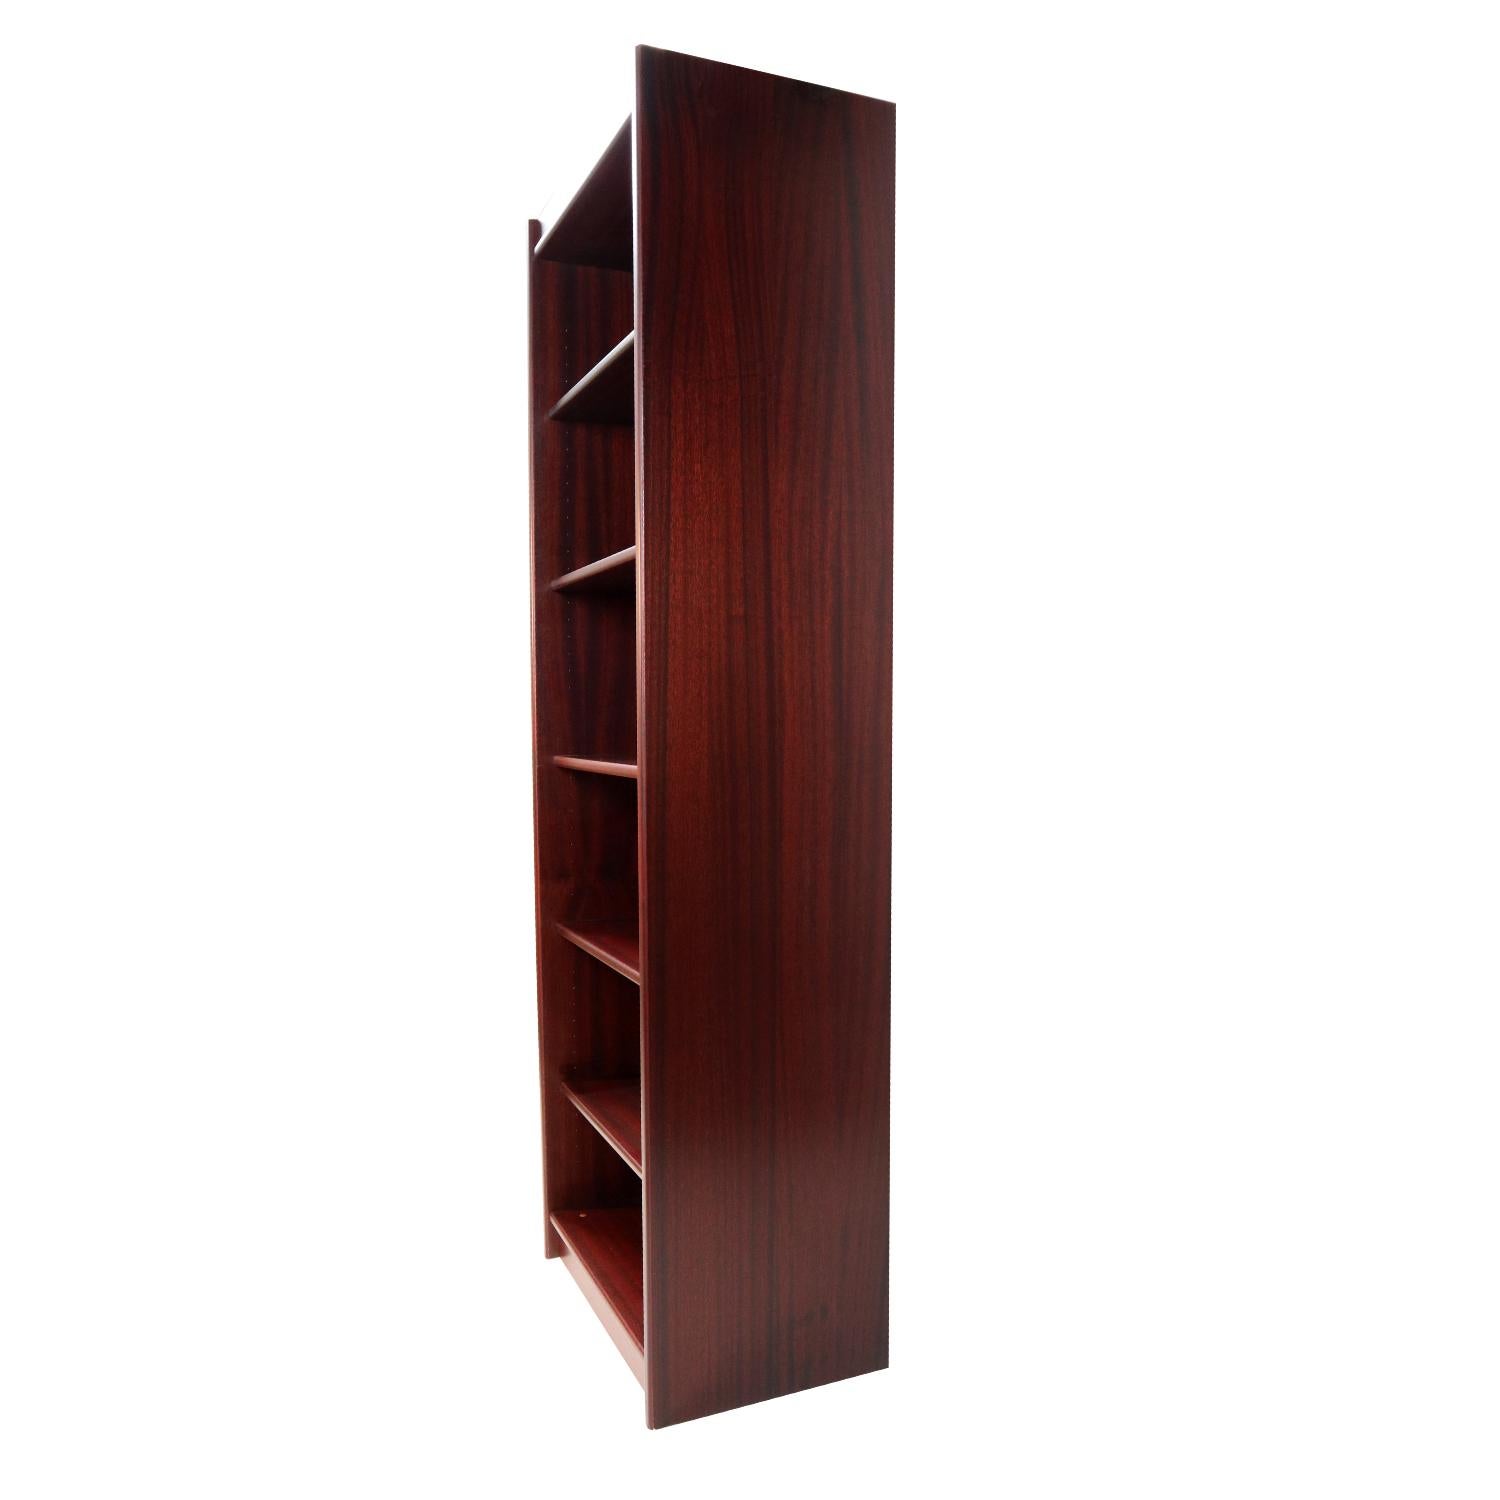 Exceptionally crafted Danish modern rosewood bookcase with adjustable shelves. This bookshelf is unusual for it’s narrow dimension. The width is 24.75? wide, much slimmer than a typical bookcase. The slender size lends itself to versatility. The